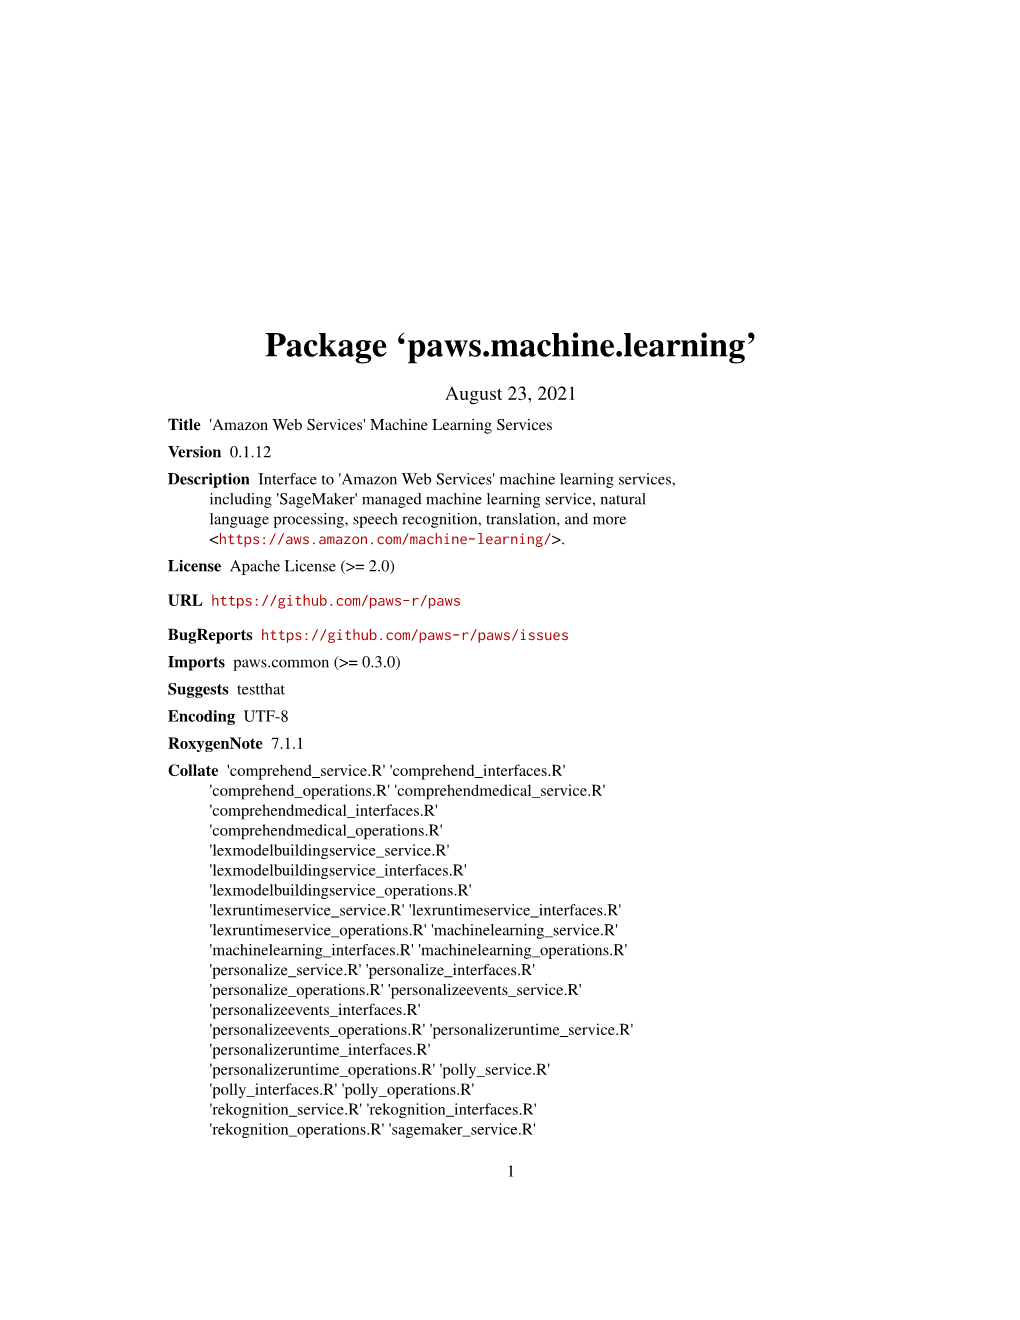 Paws.Machine.Learning: 'Amazon Web Services' Machine Learning Services